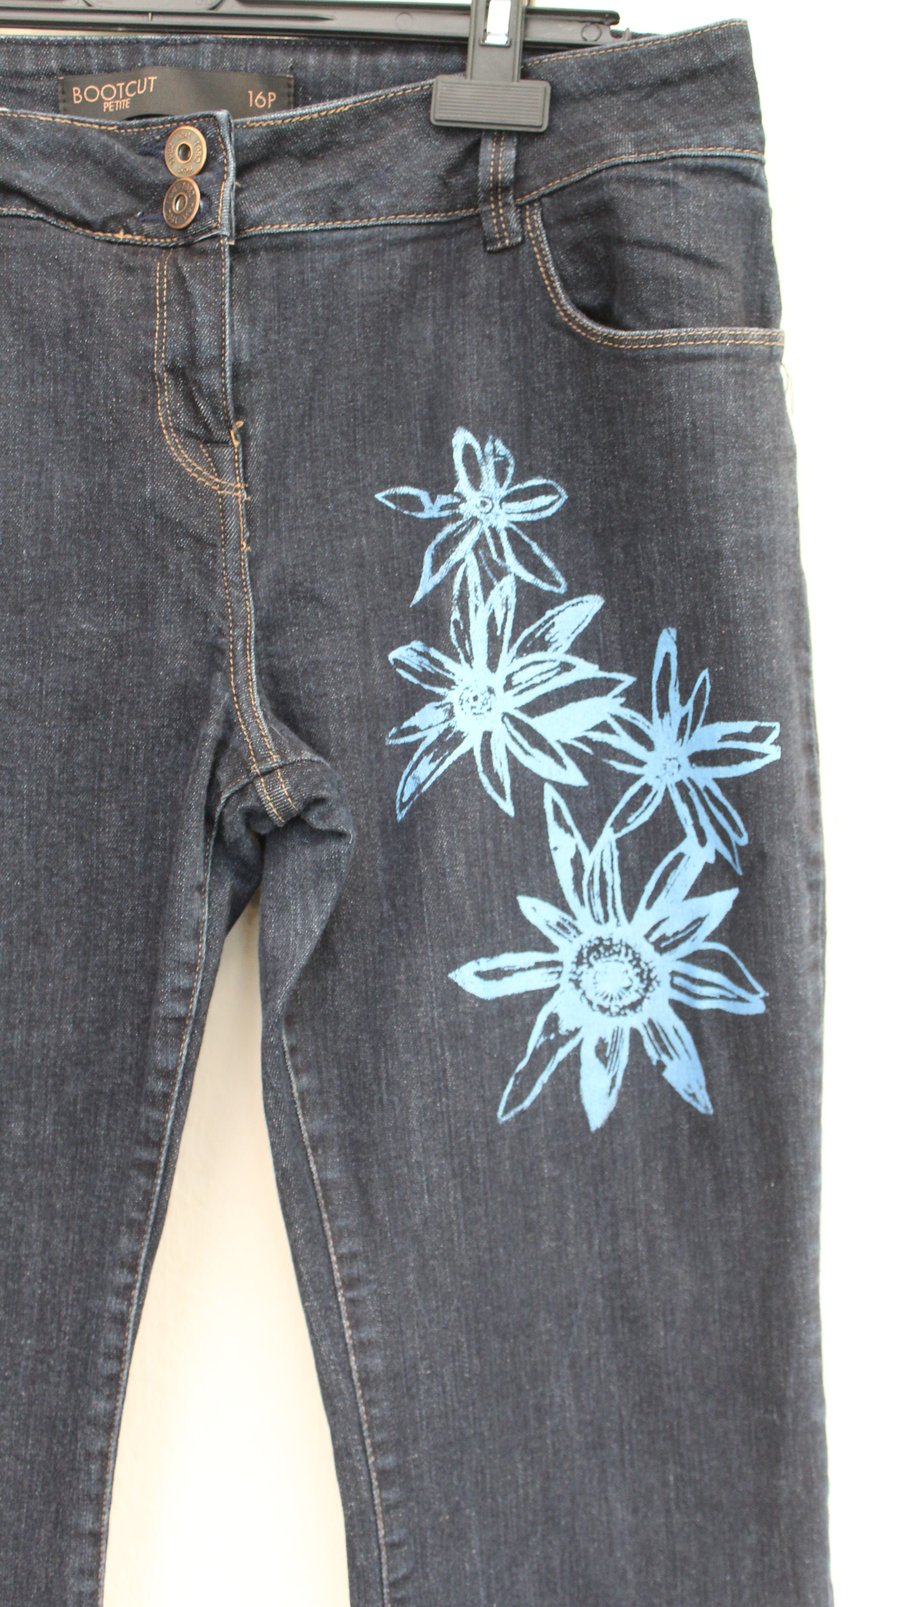 size 16,petite, Jeans, Eco reworked Next jeans... - Folksy